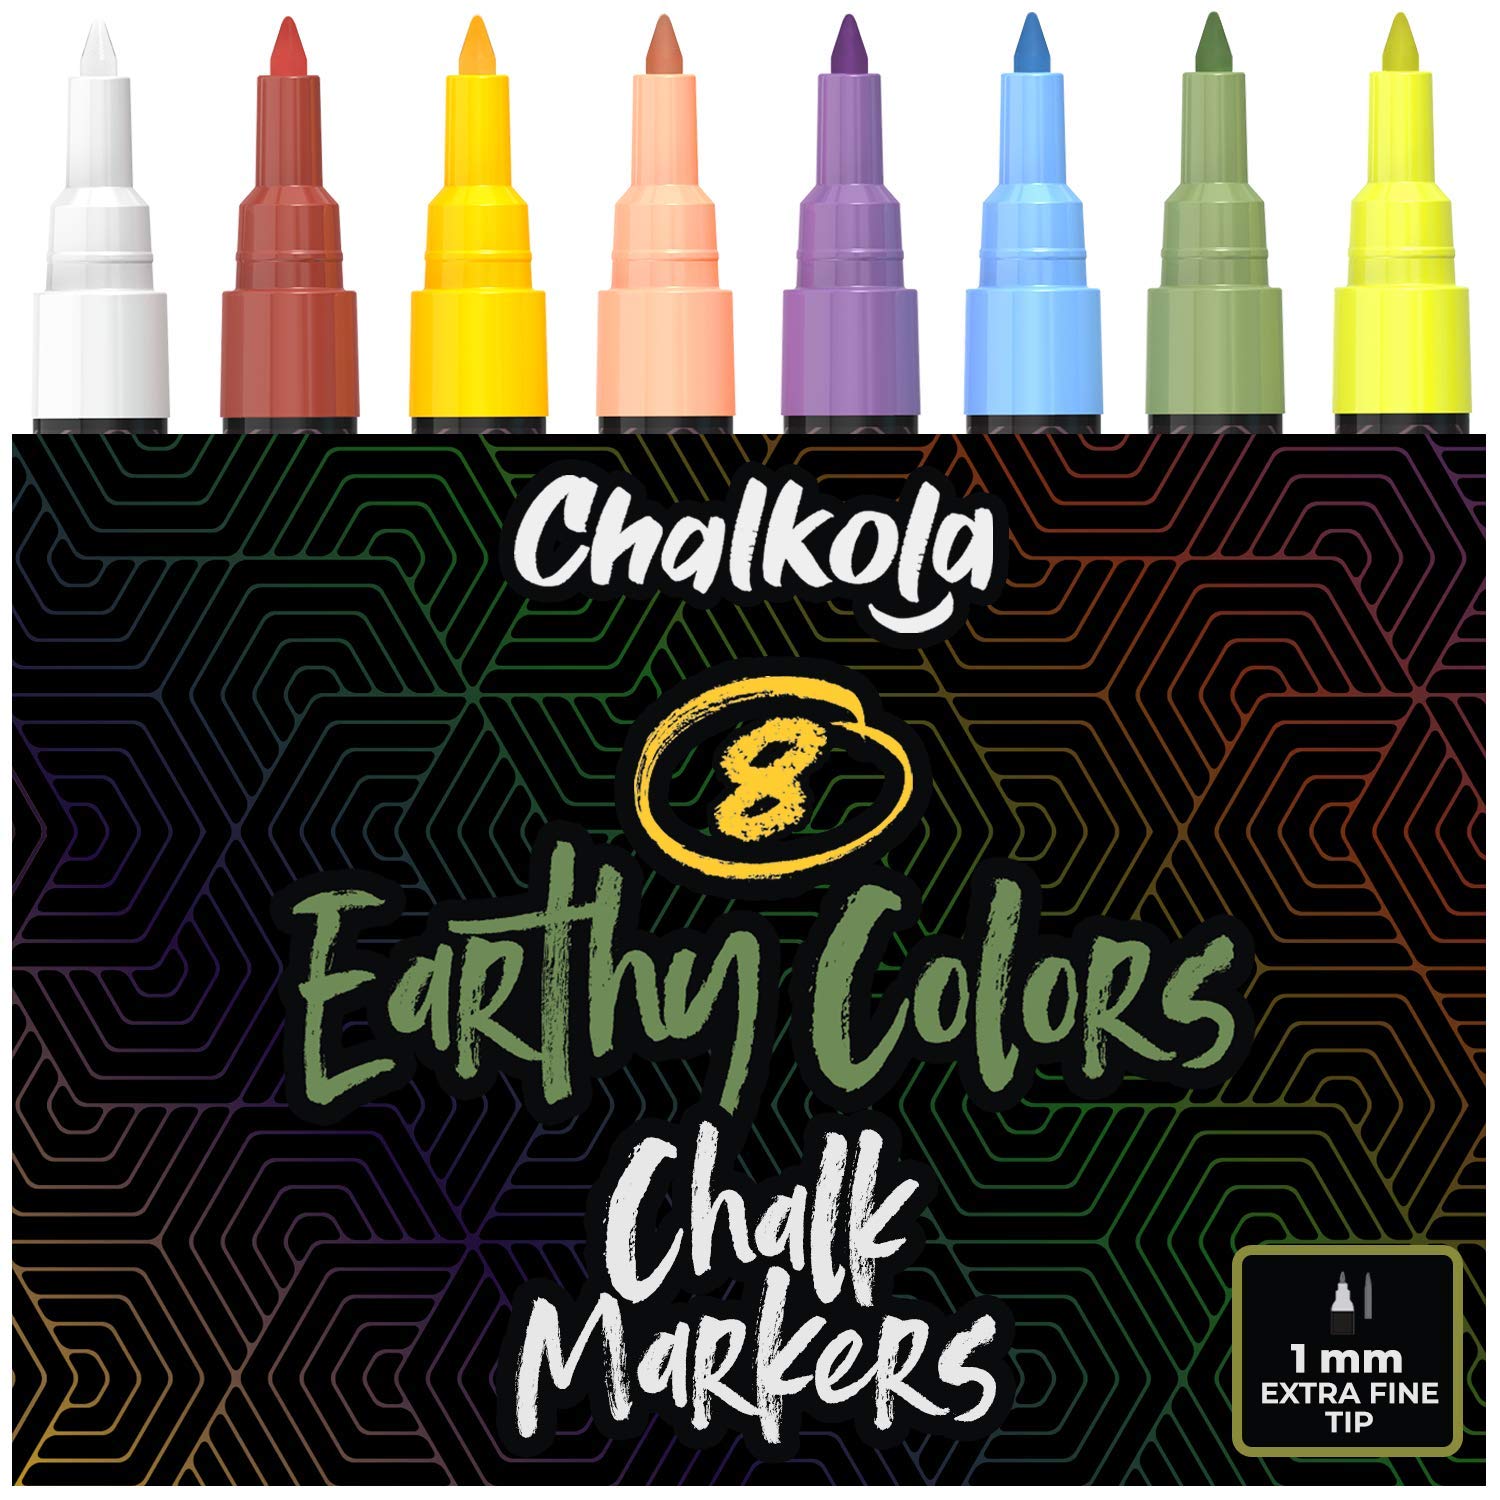 Book Cover 1mm Extra Fine Tip Chalkboard Chalk Markers (8 Pack) - Classic Earth Colors for Blackboard, Chalkboards, Windows, Glass, Bistro | Non-Toxic Wet Erase Liquid Chalk Ink Pens